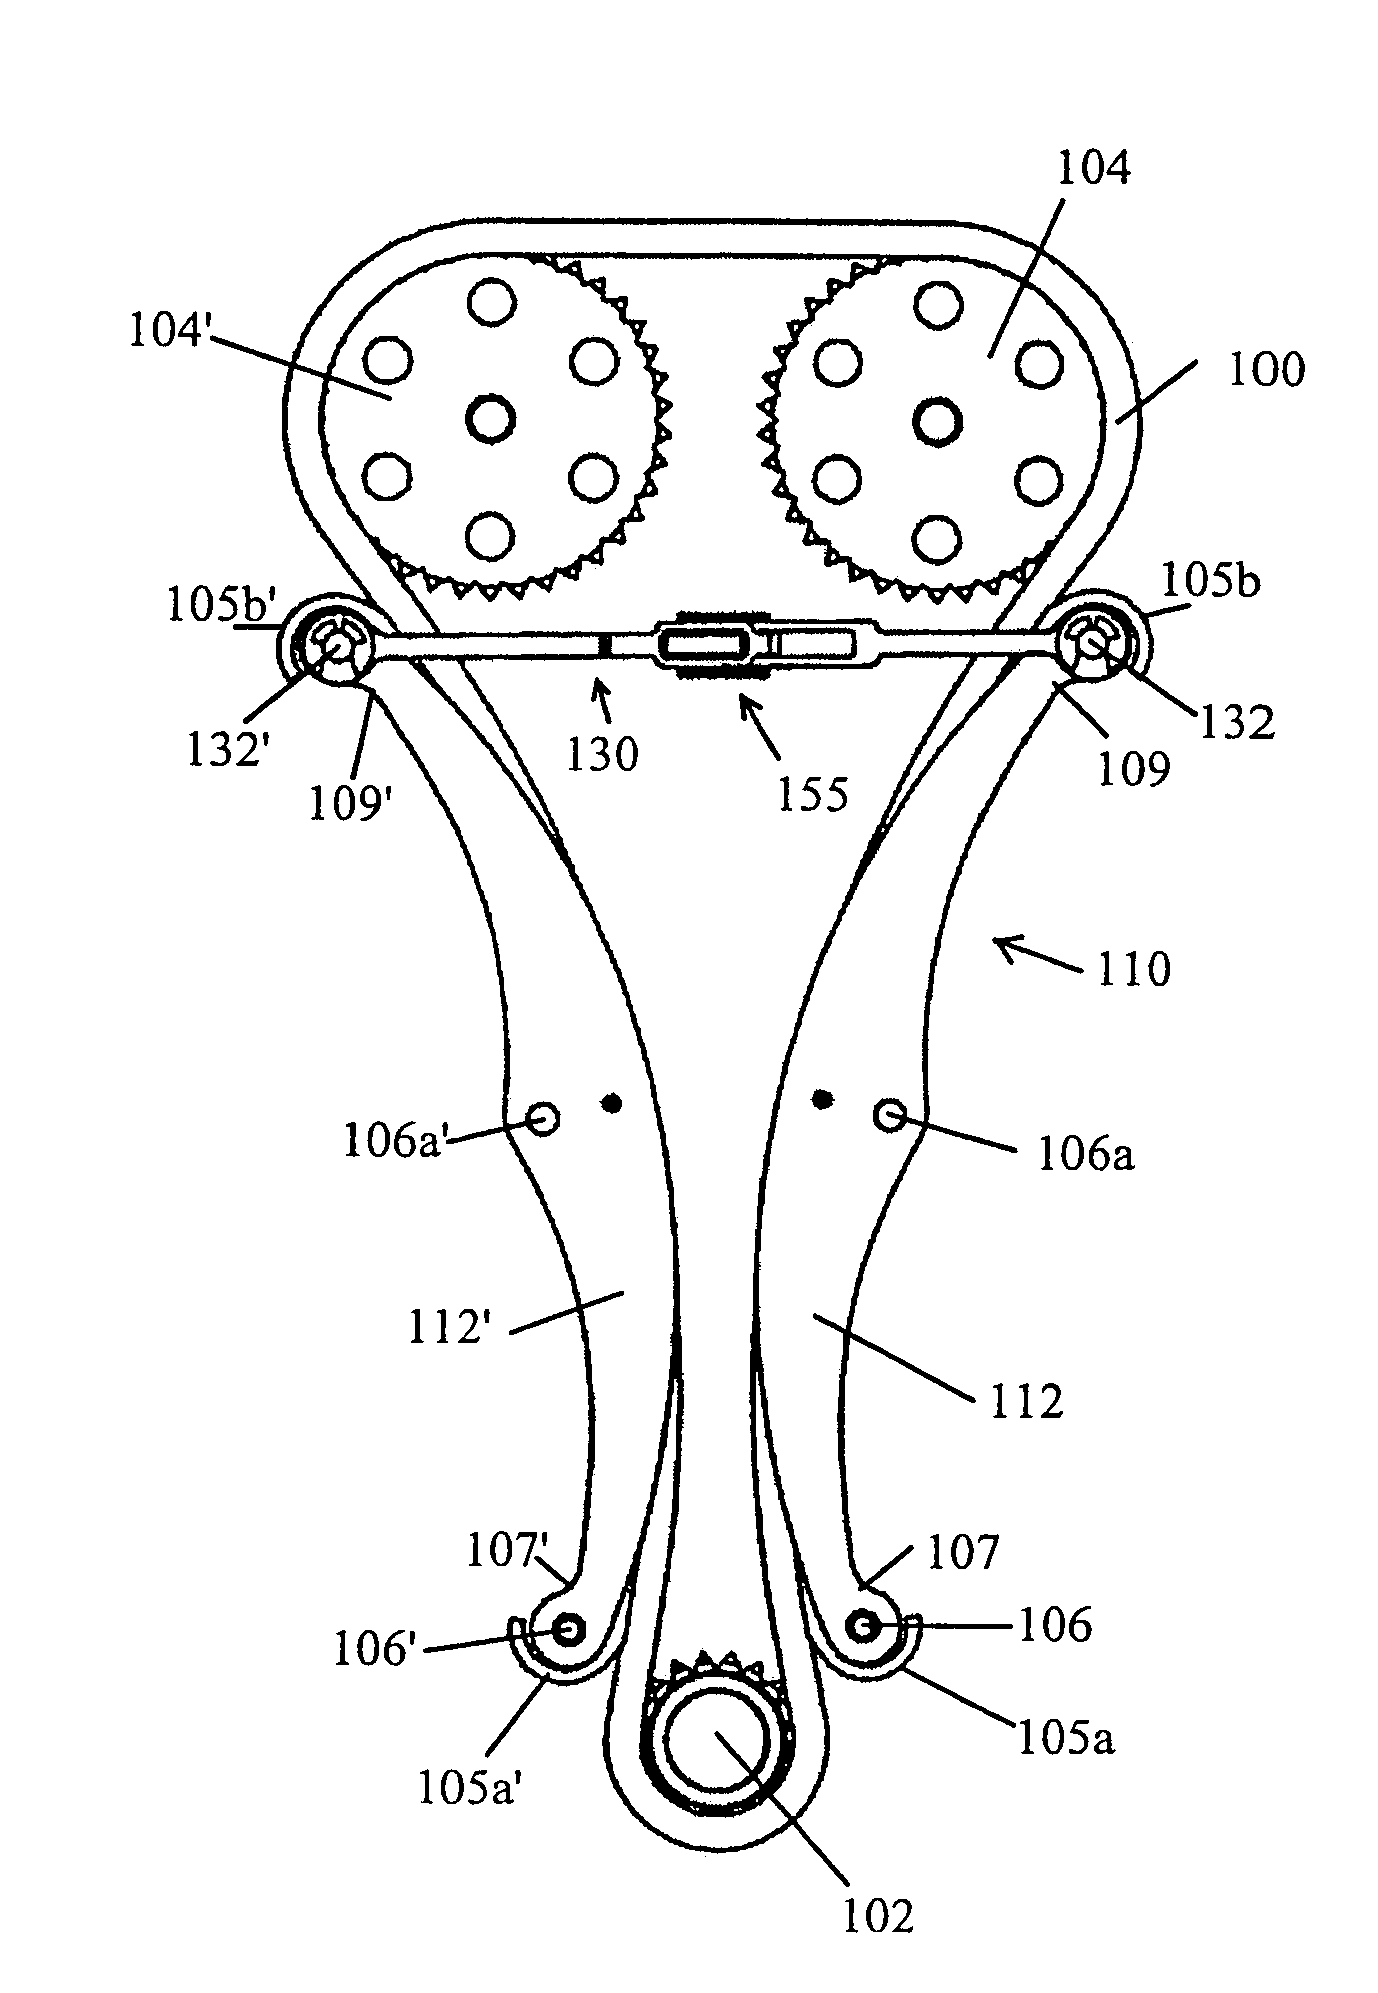 Mechanical strap tensioner for multi-strand tensioning